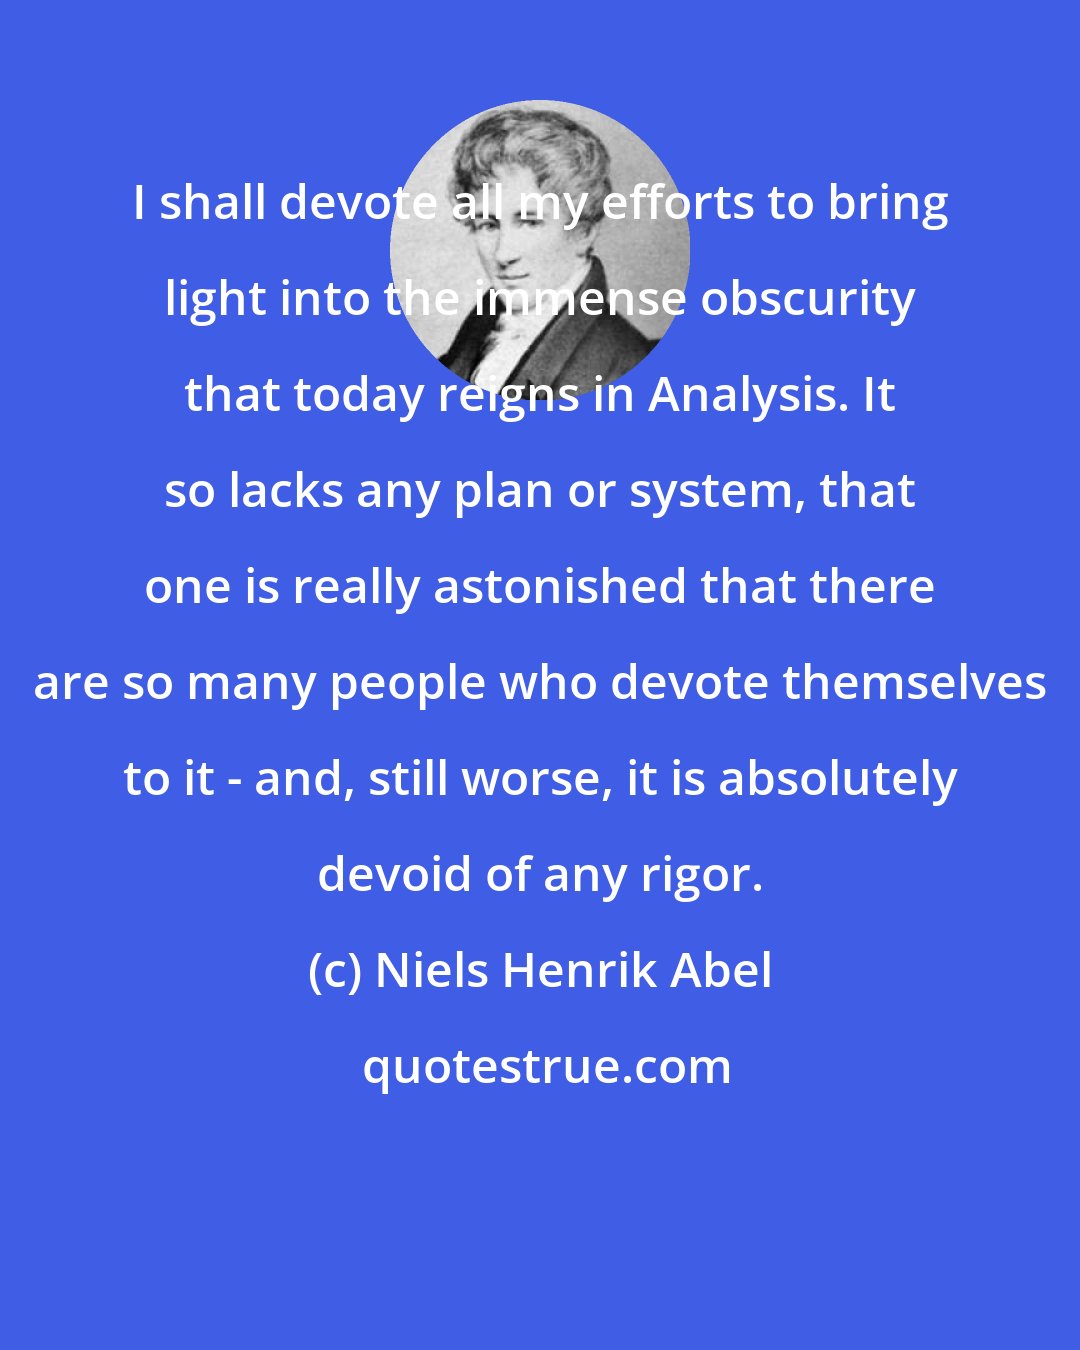 Niels Henrik Abel: I shall devote all my efforts to bring light into the immense obscurity that today reigns in Analysis. It so lacks any plan or system, that one is really astonished that there are so many people who devote themselves to it - and, still worse, it is absolutely devoid of any rigor.